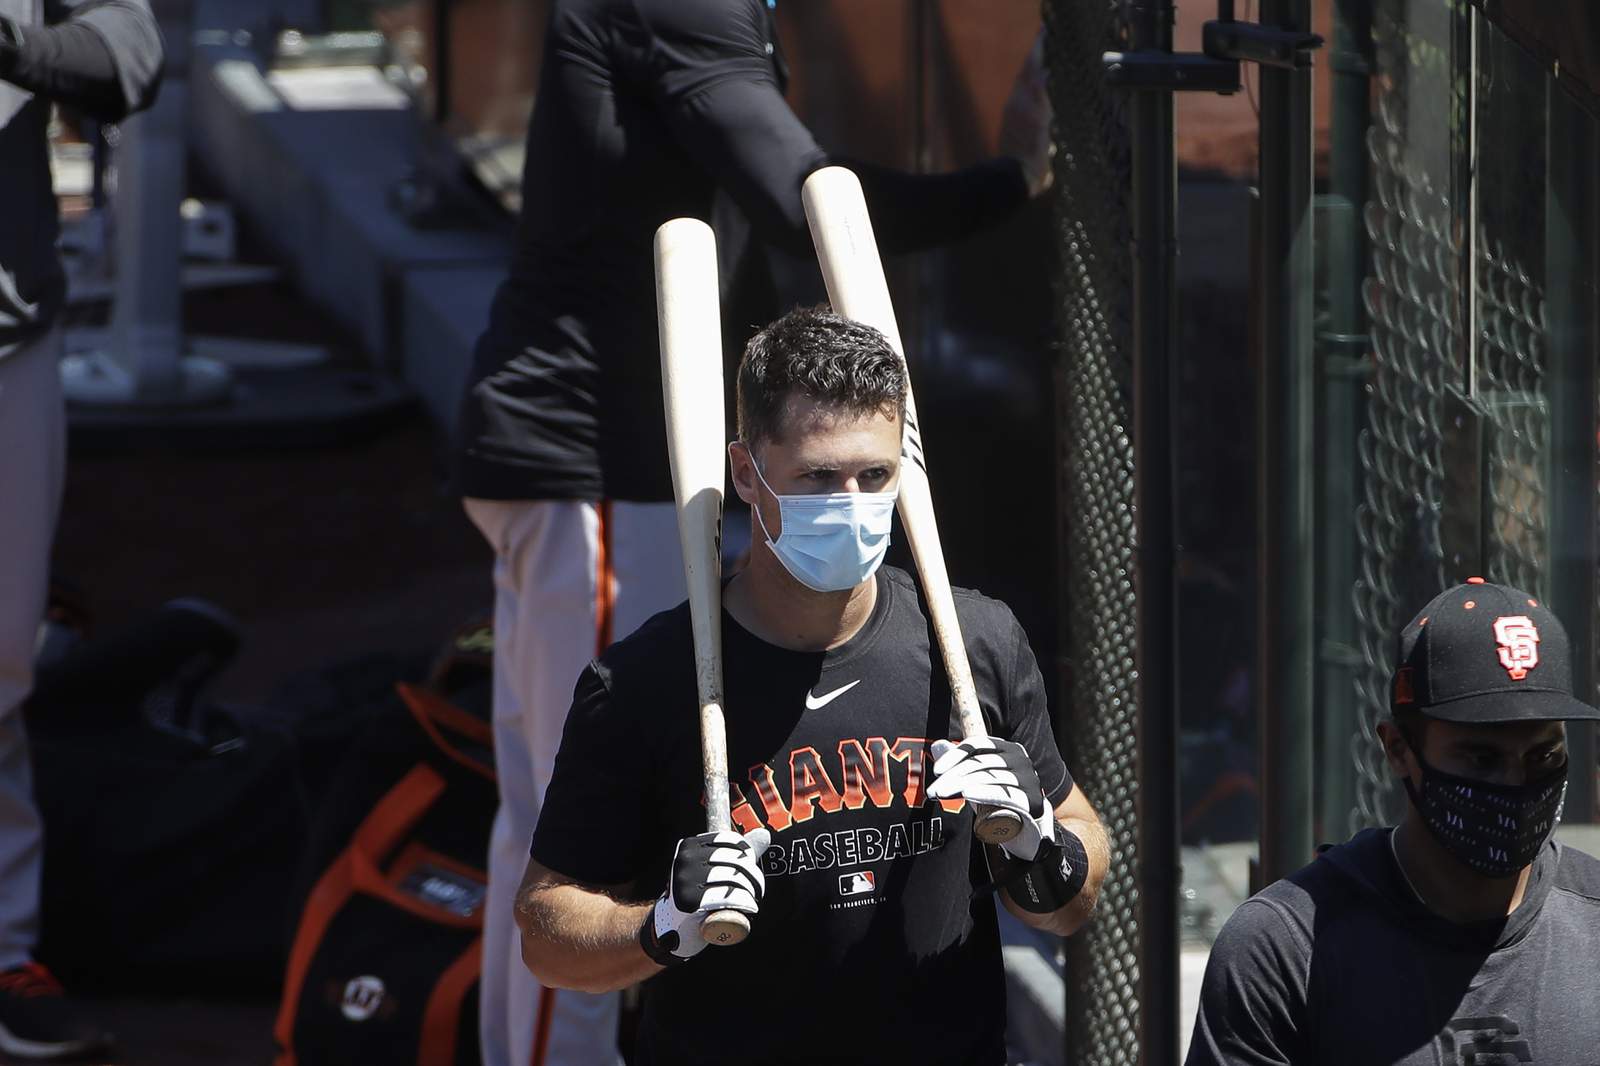 Giants star catcher Posey out this year over virus concerns